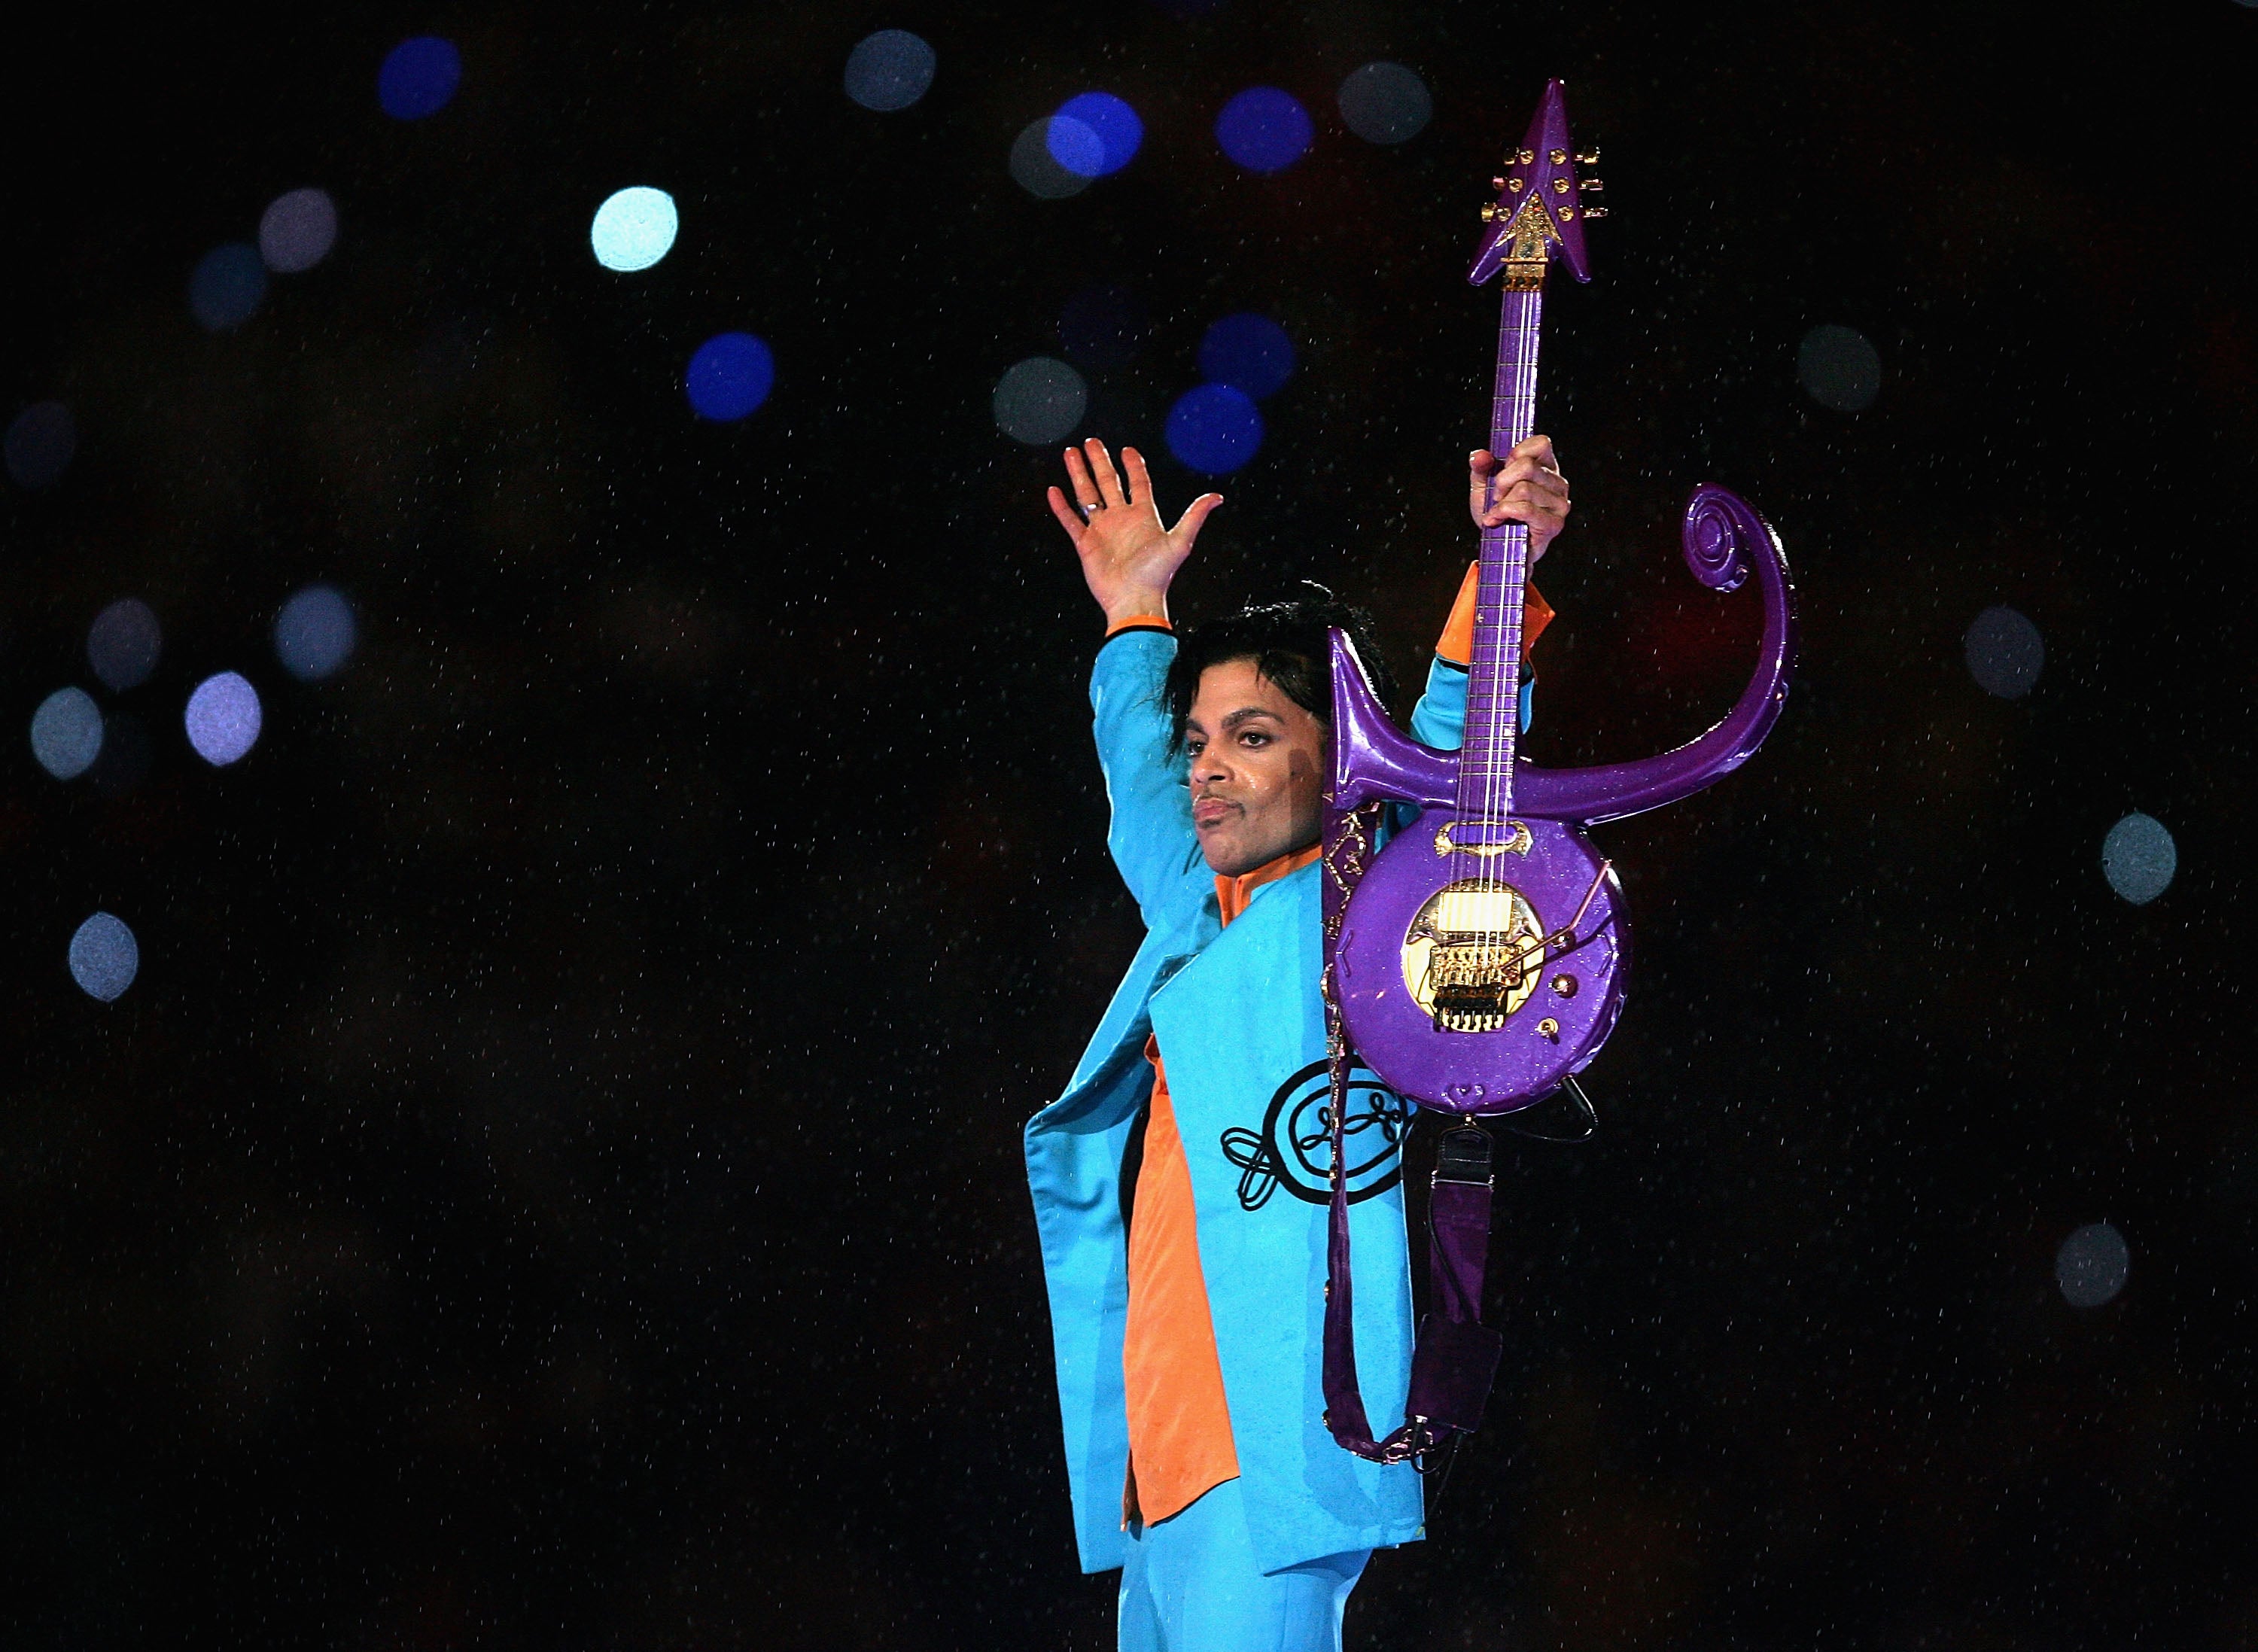 Prince wears the colours of the Miami Dolphins for the 2007 Super Bowl